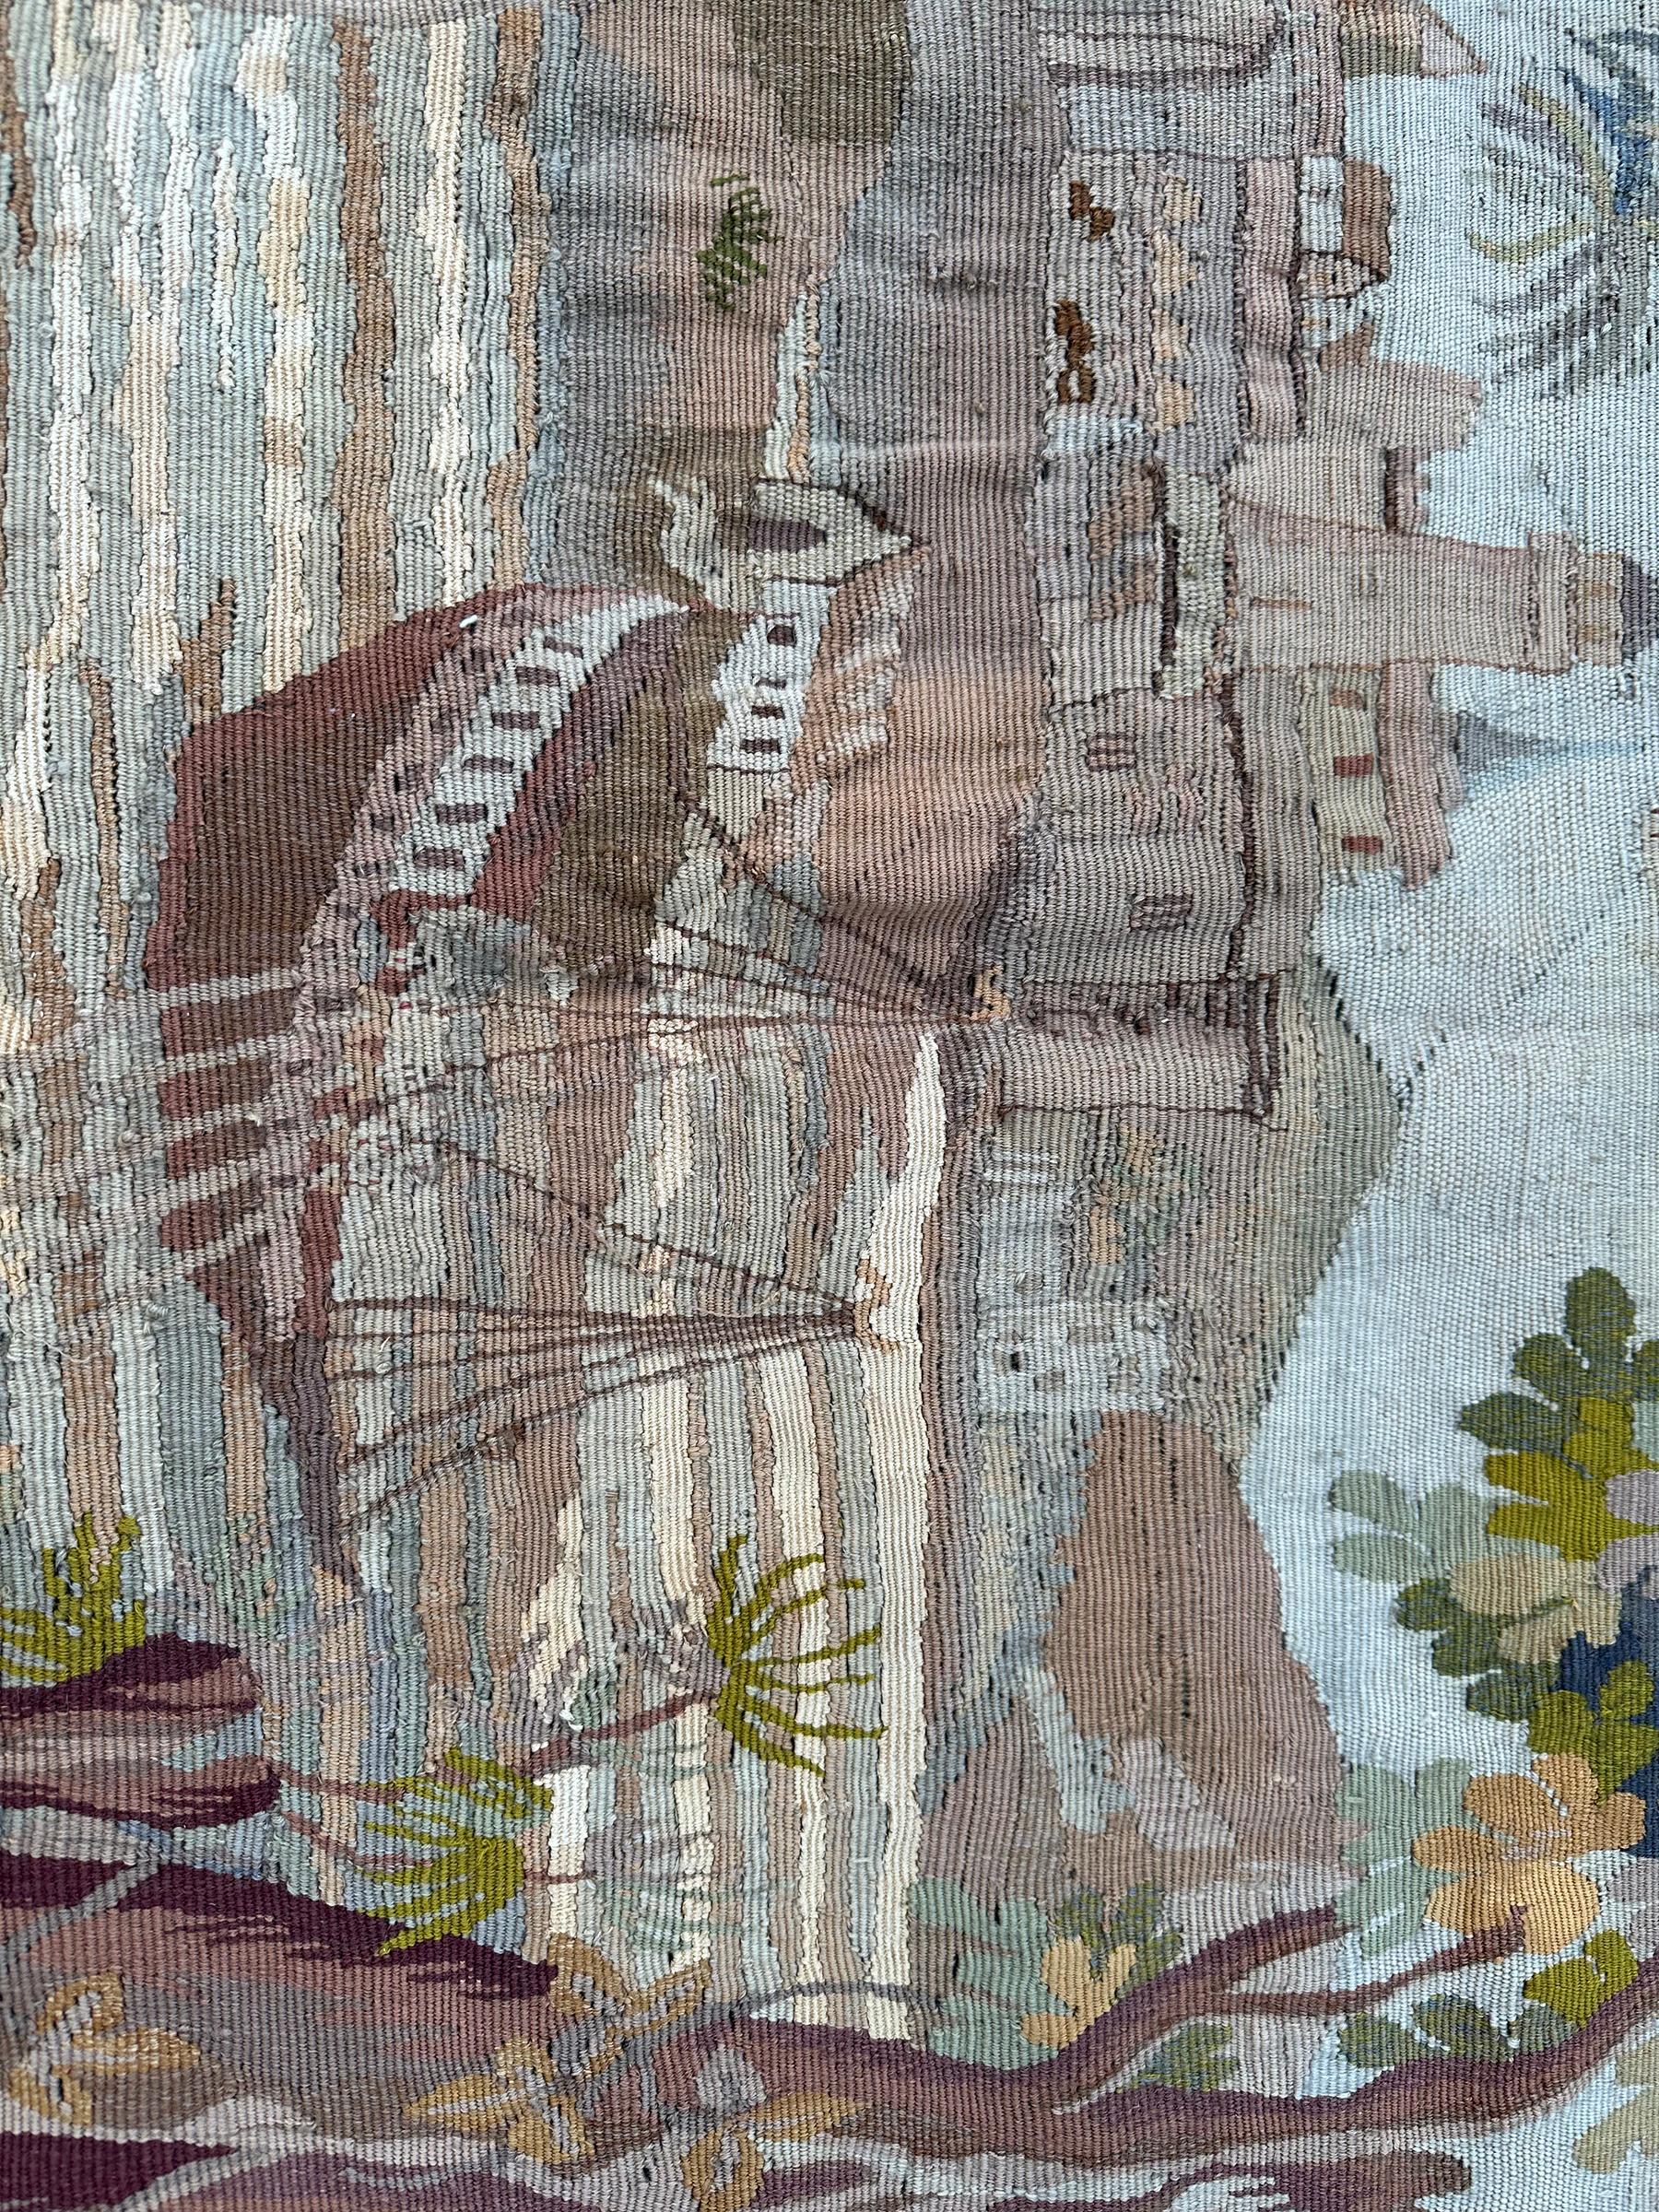 Late 19th Century Antique French Tapestry Verdure Signed 1880 Wool & Silk 5x7 153cm x 201cm For Sale